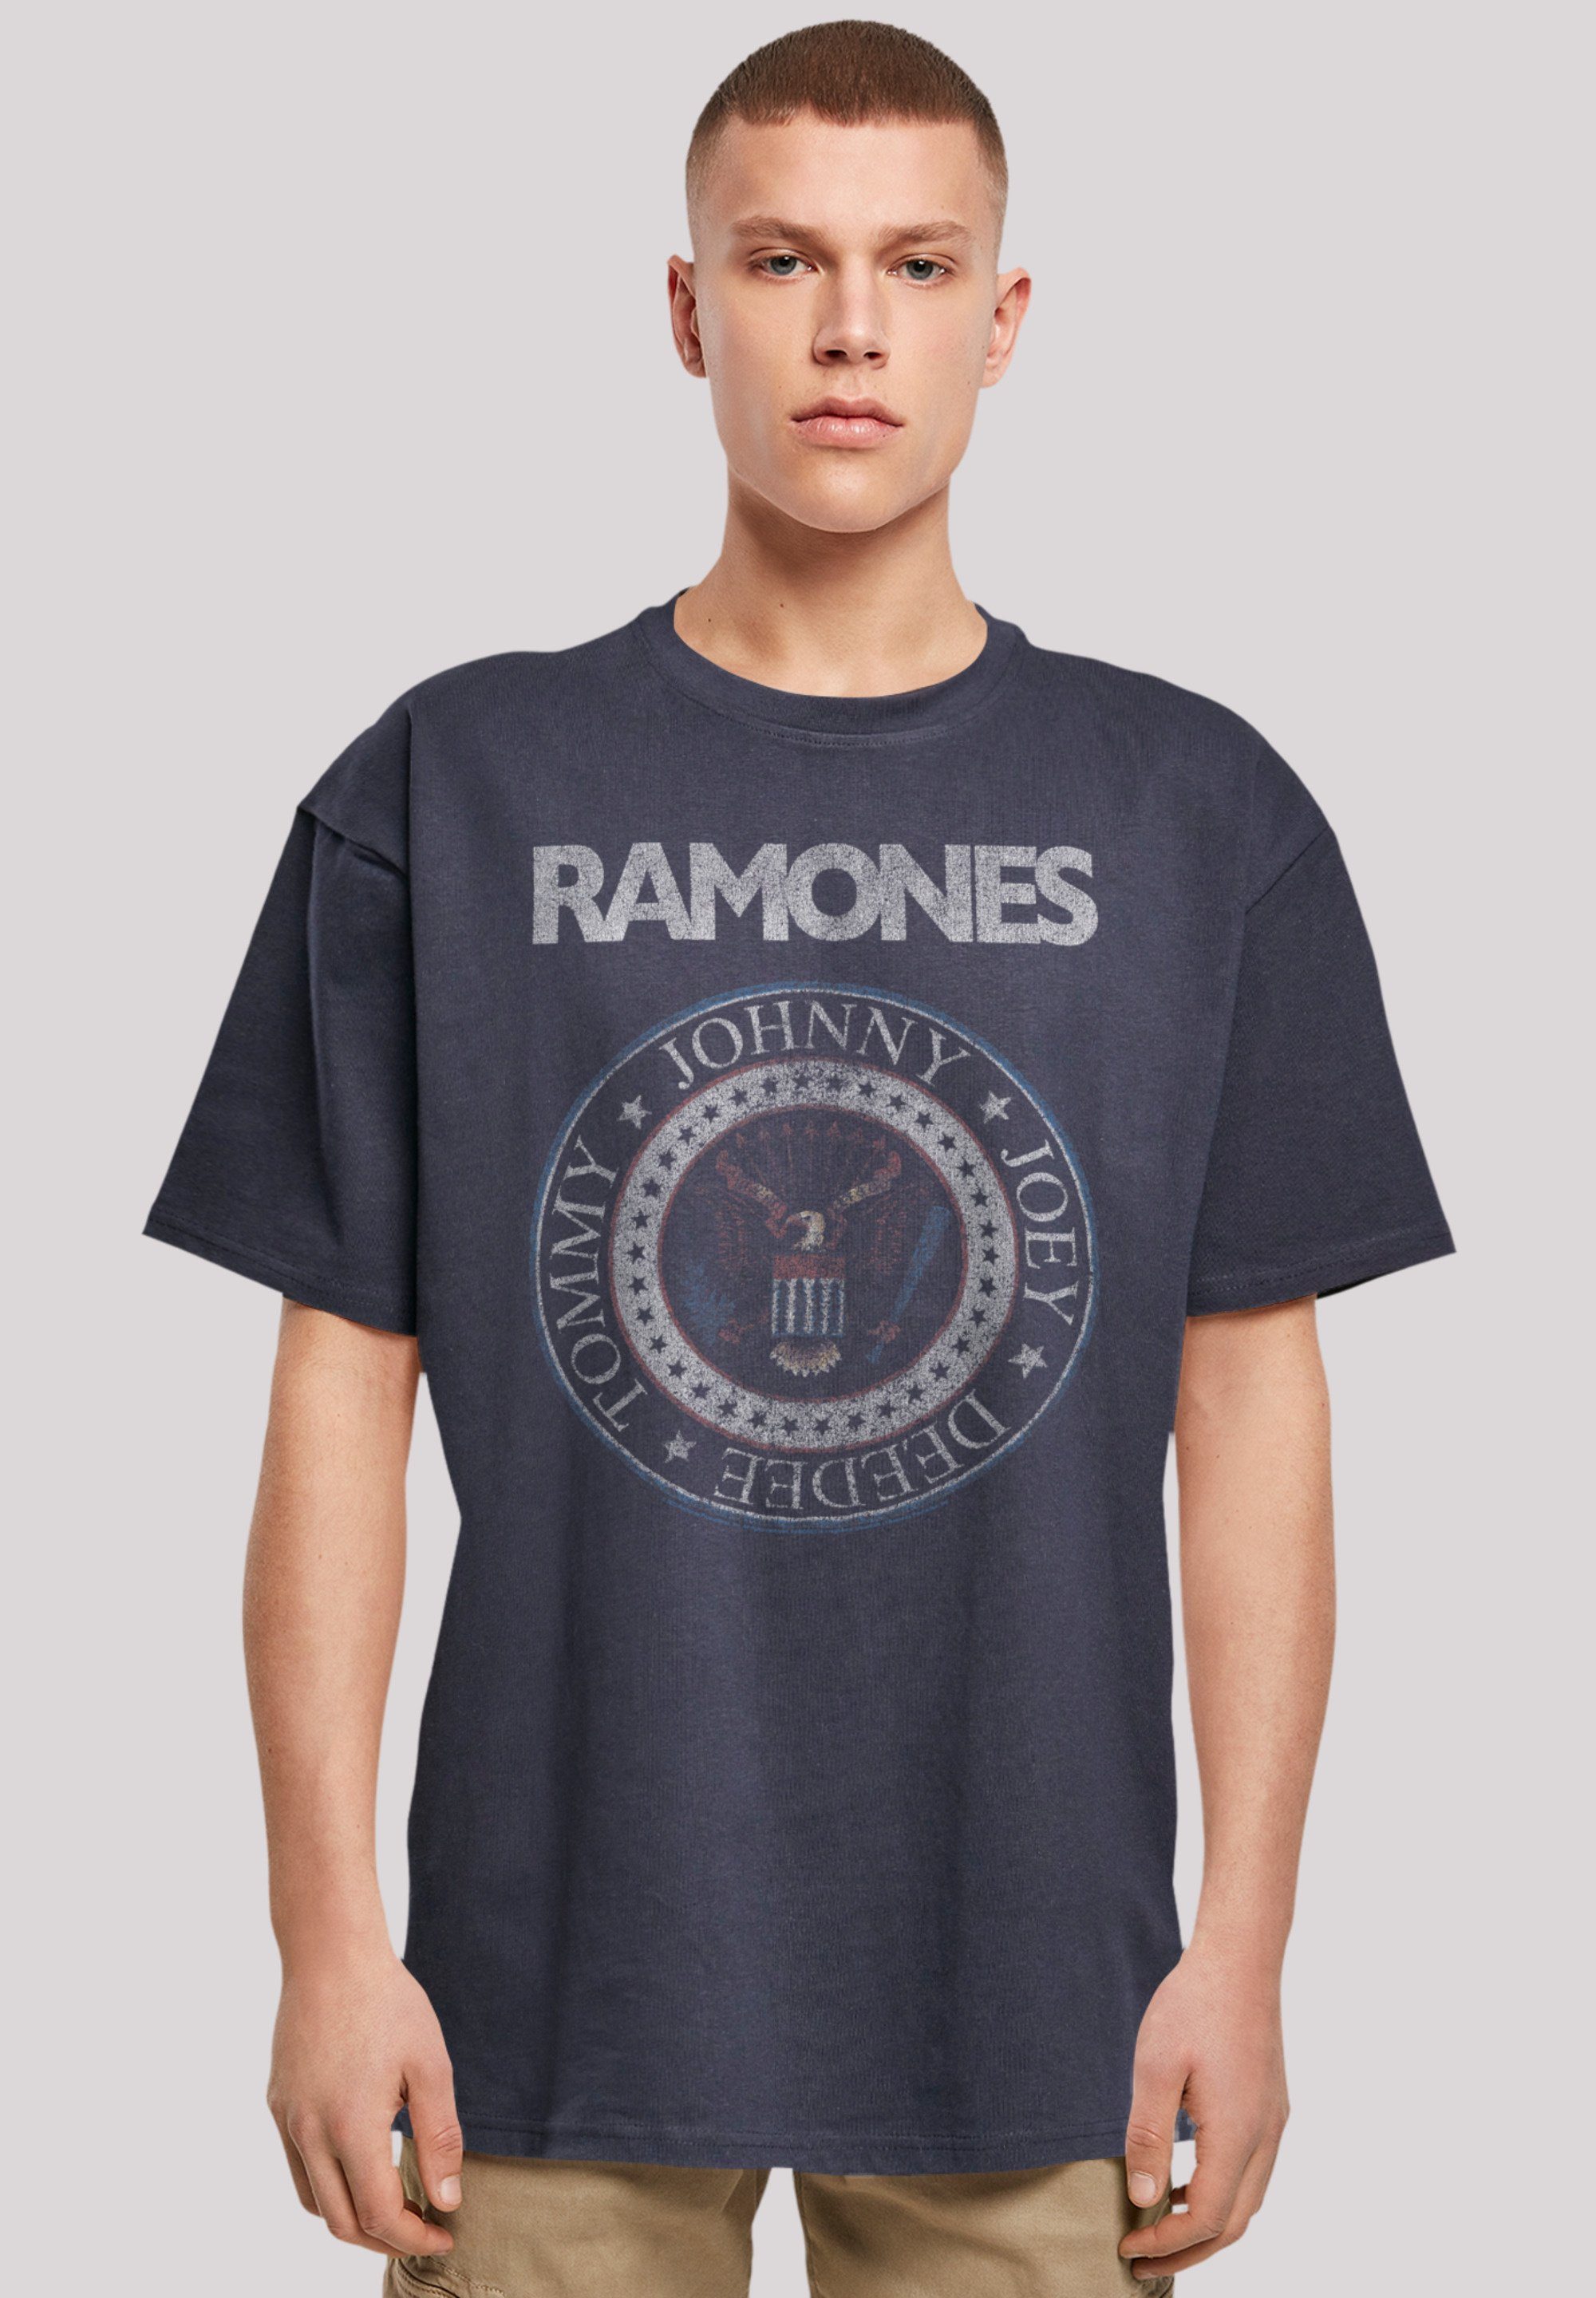 F4NT4STIC T-Shirt Ramones Rock Musik Band Red White And Seal Premium Qualität, Band, Rock-Musik navy | T-Shirts